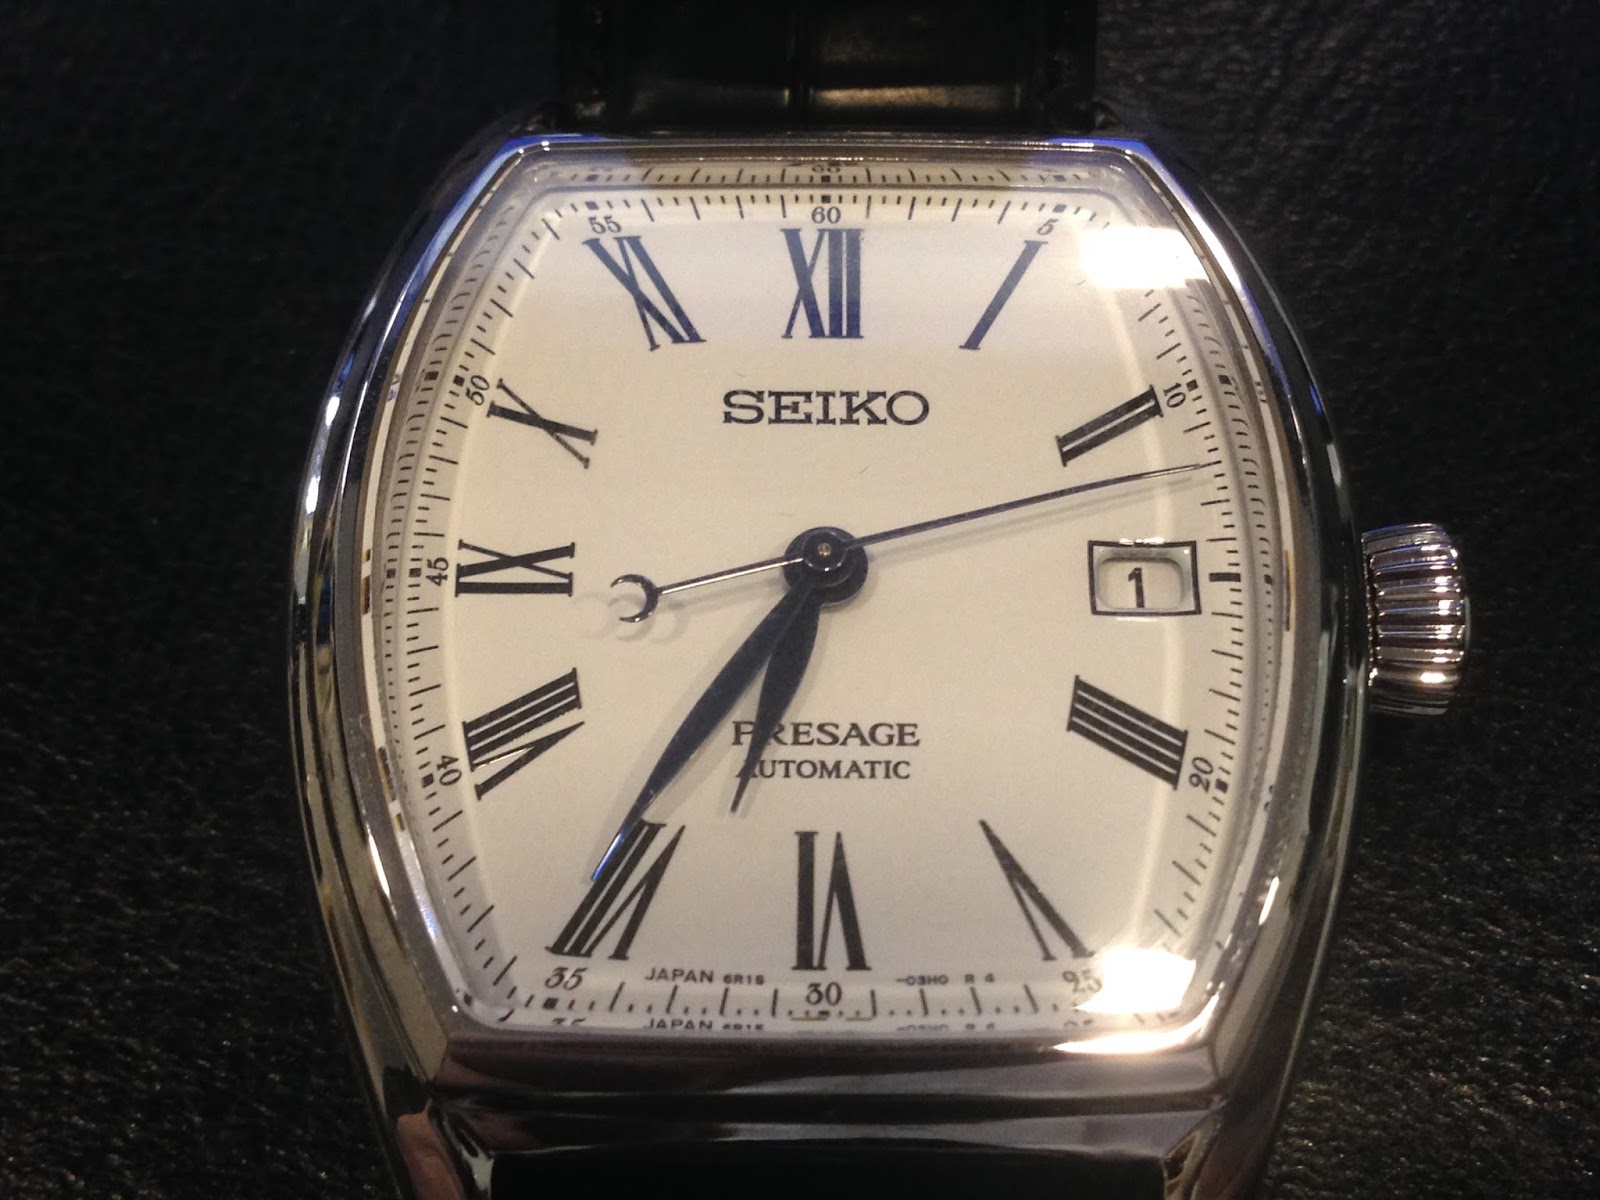 My Eastern Watch Collection: Seiko Presage Enamel Automatic SPB049J1 Watch  (Part of the SRQ023J1, SPB045J1 & SPB047J1 Series) – A Fine Dress Watch  With Great Value, A Review (plus Video)